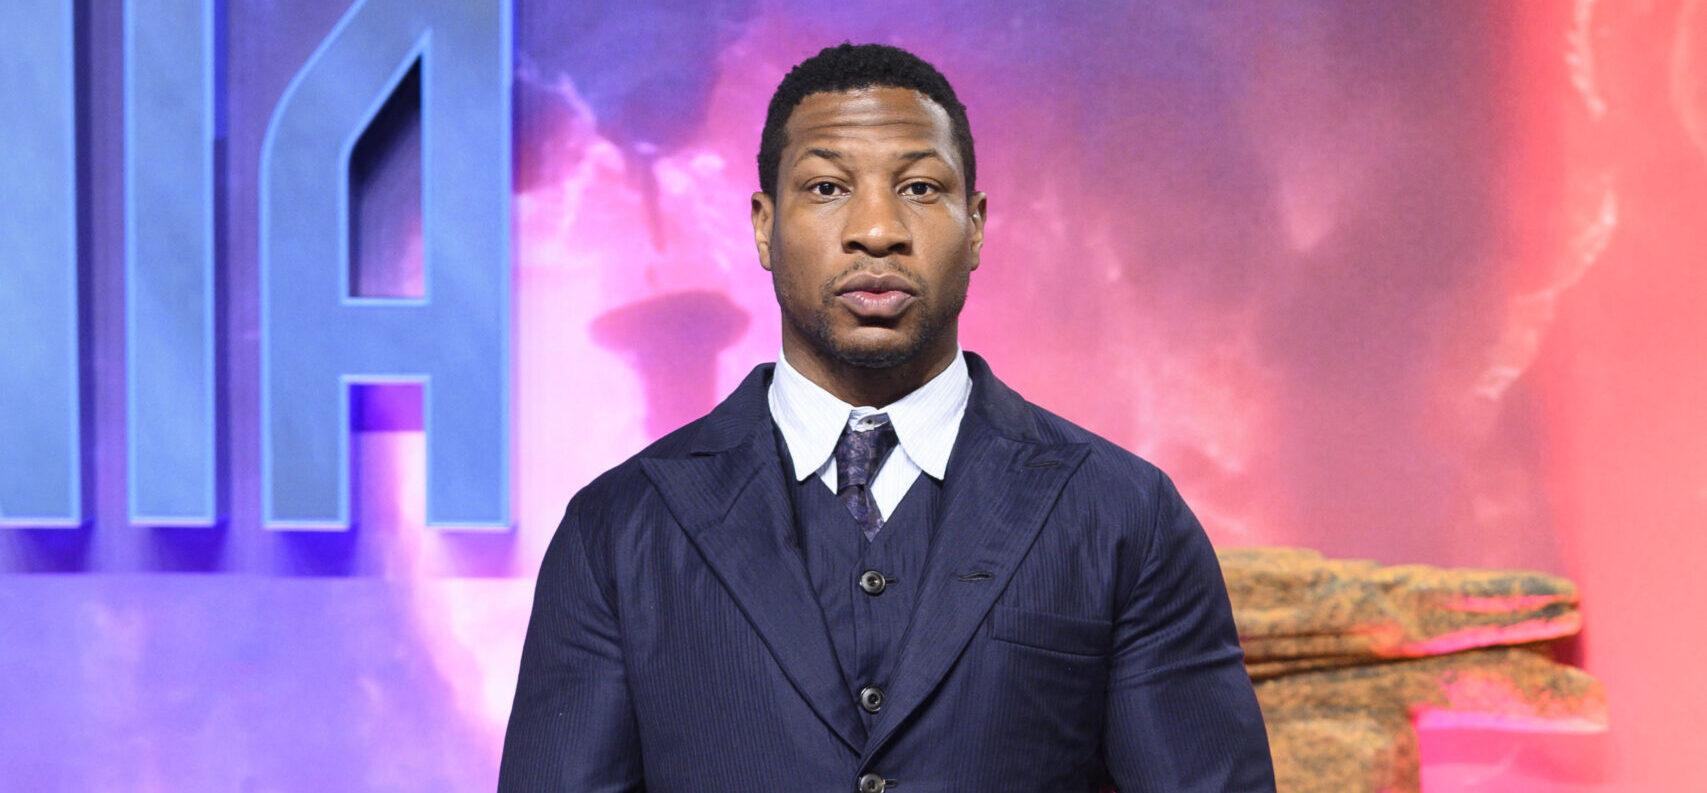 Marvel Reportedly Planned To Reduce Jonathan Majors’ Role In Films Prior To Conviction